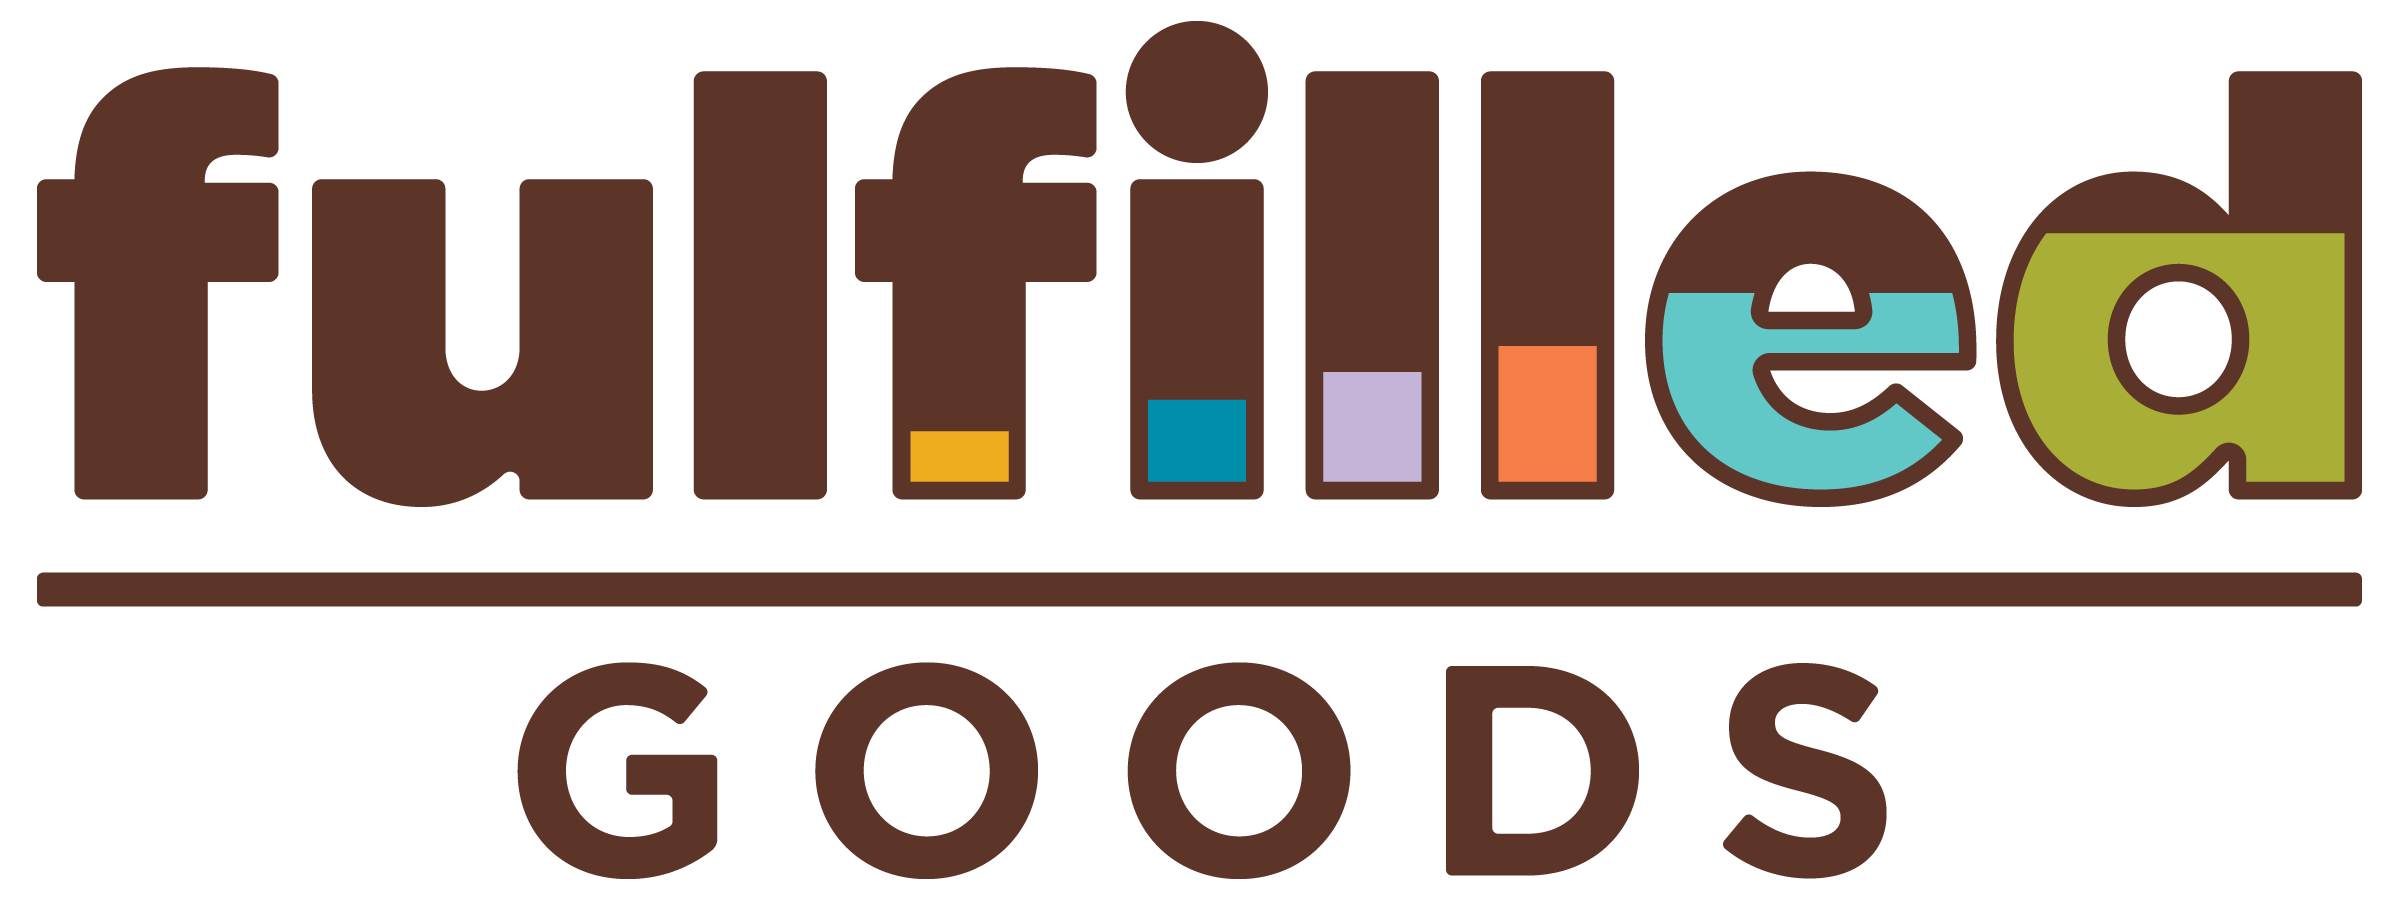 Fulfilled Goods gift card